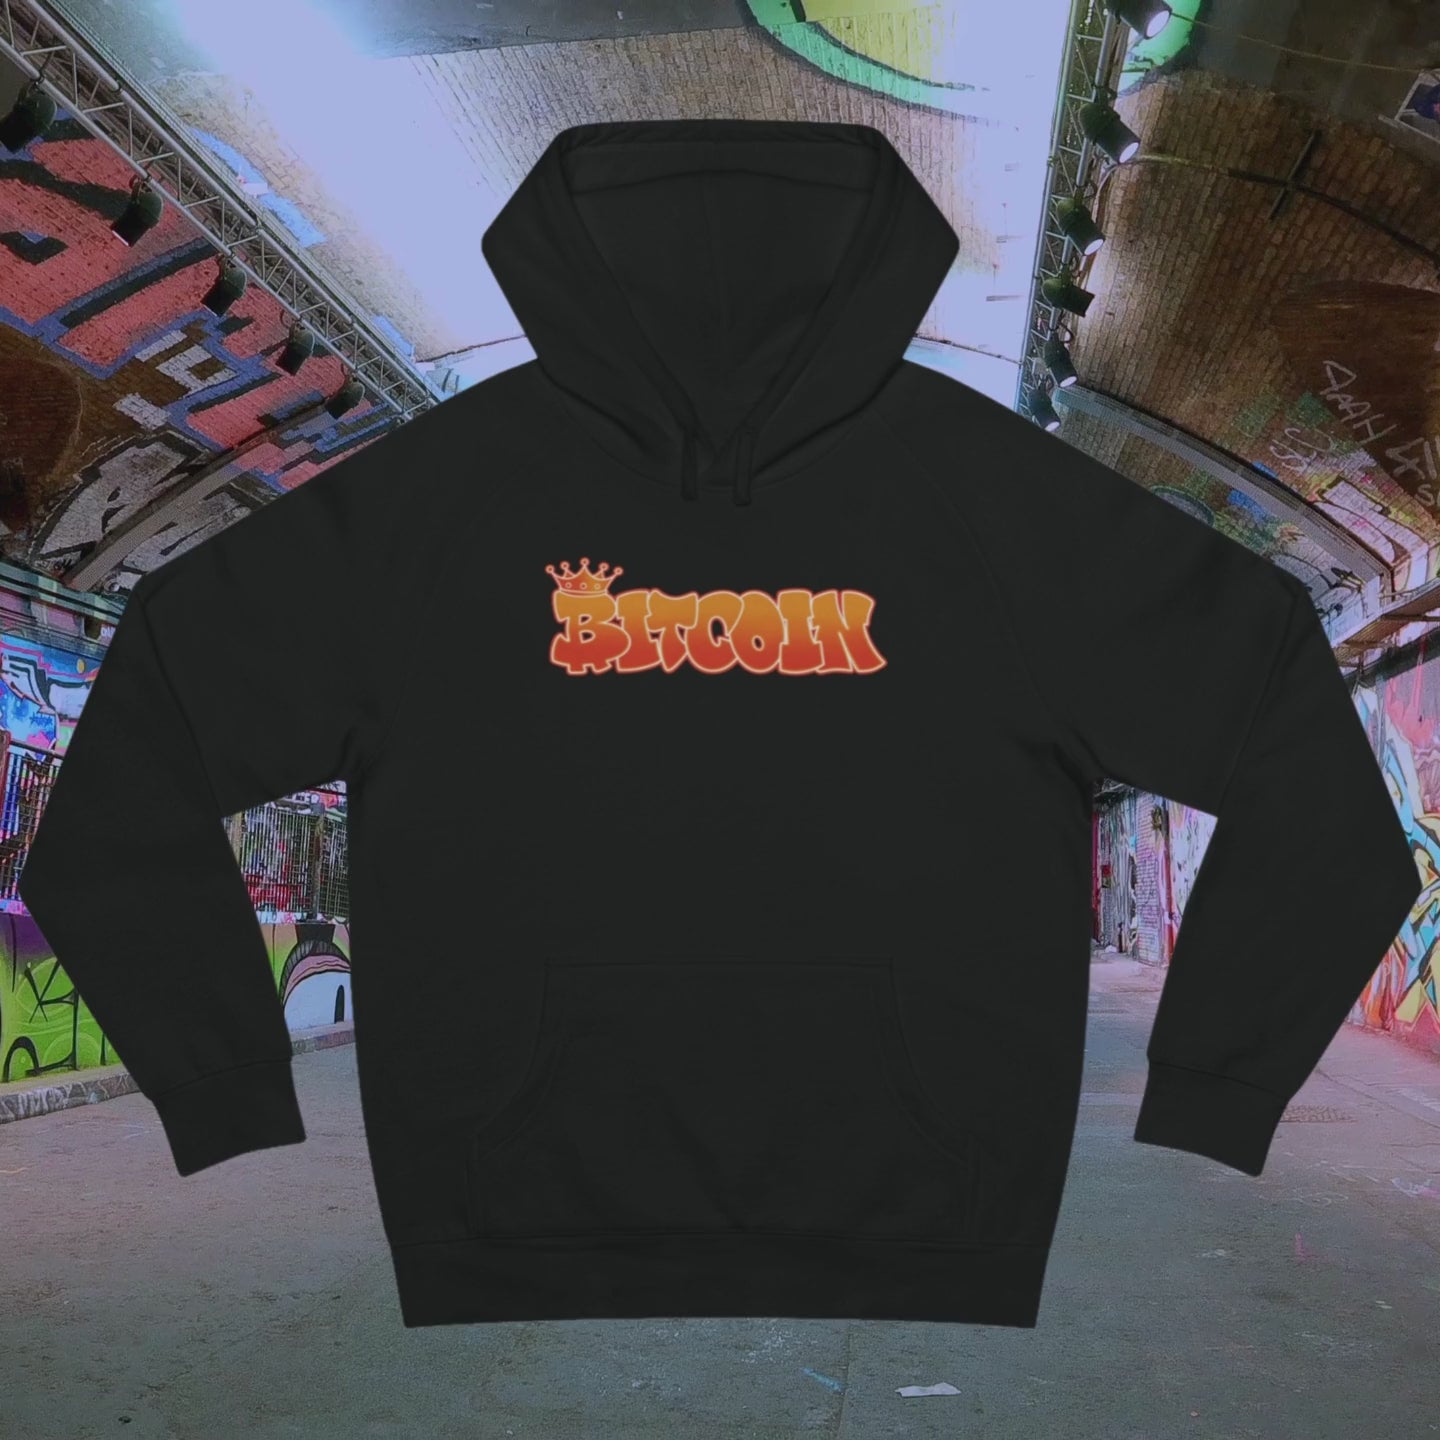 Bitcoin Graffiti Hoodie Video. Available at NEONCRYPTO STORE. 